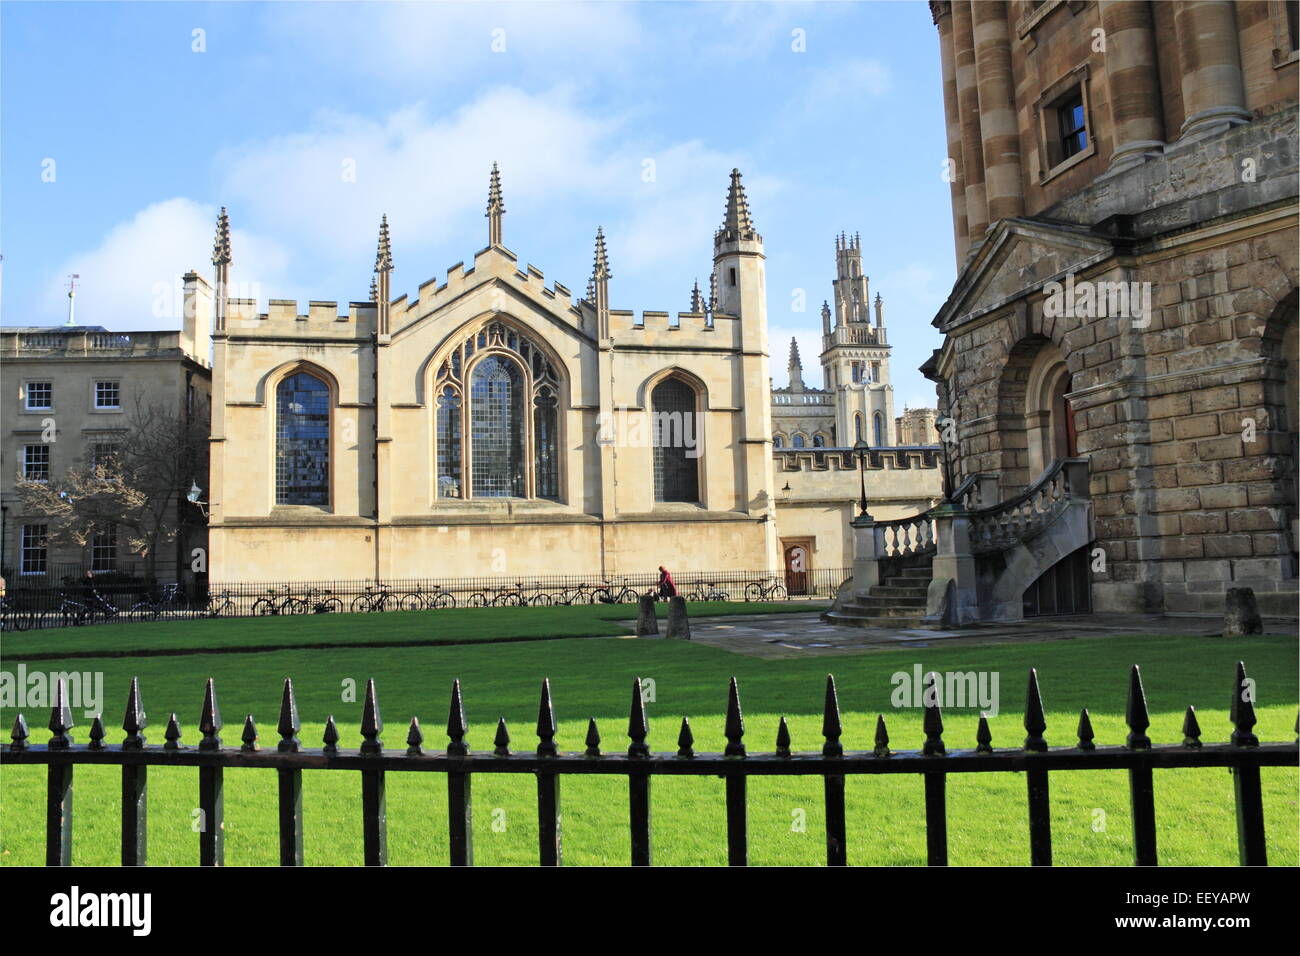 Radcliffe Camera and All Souls College, Radcliffe Square, Oxford, Oxfordshire, England, Great Britain, United Kingdom UK, Europe Stock Photo